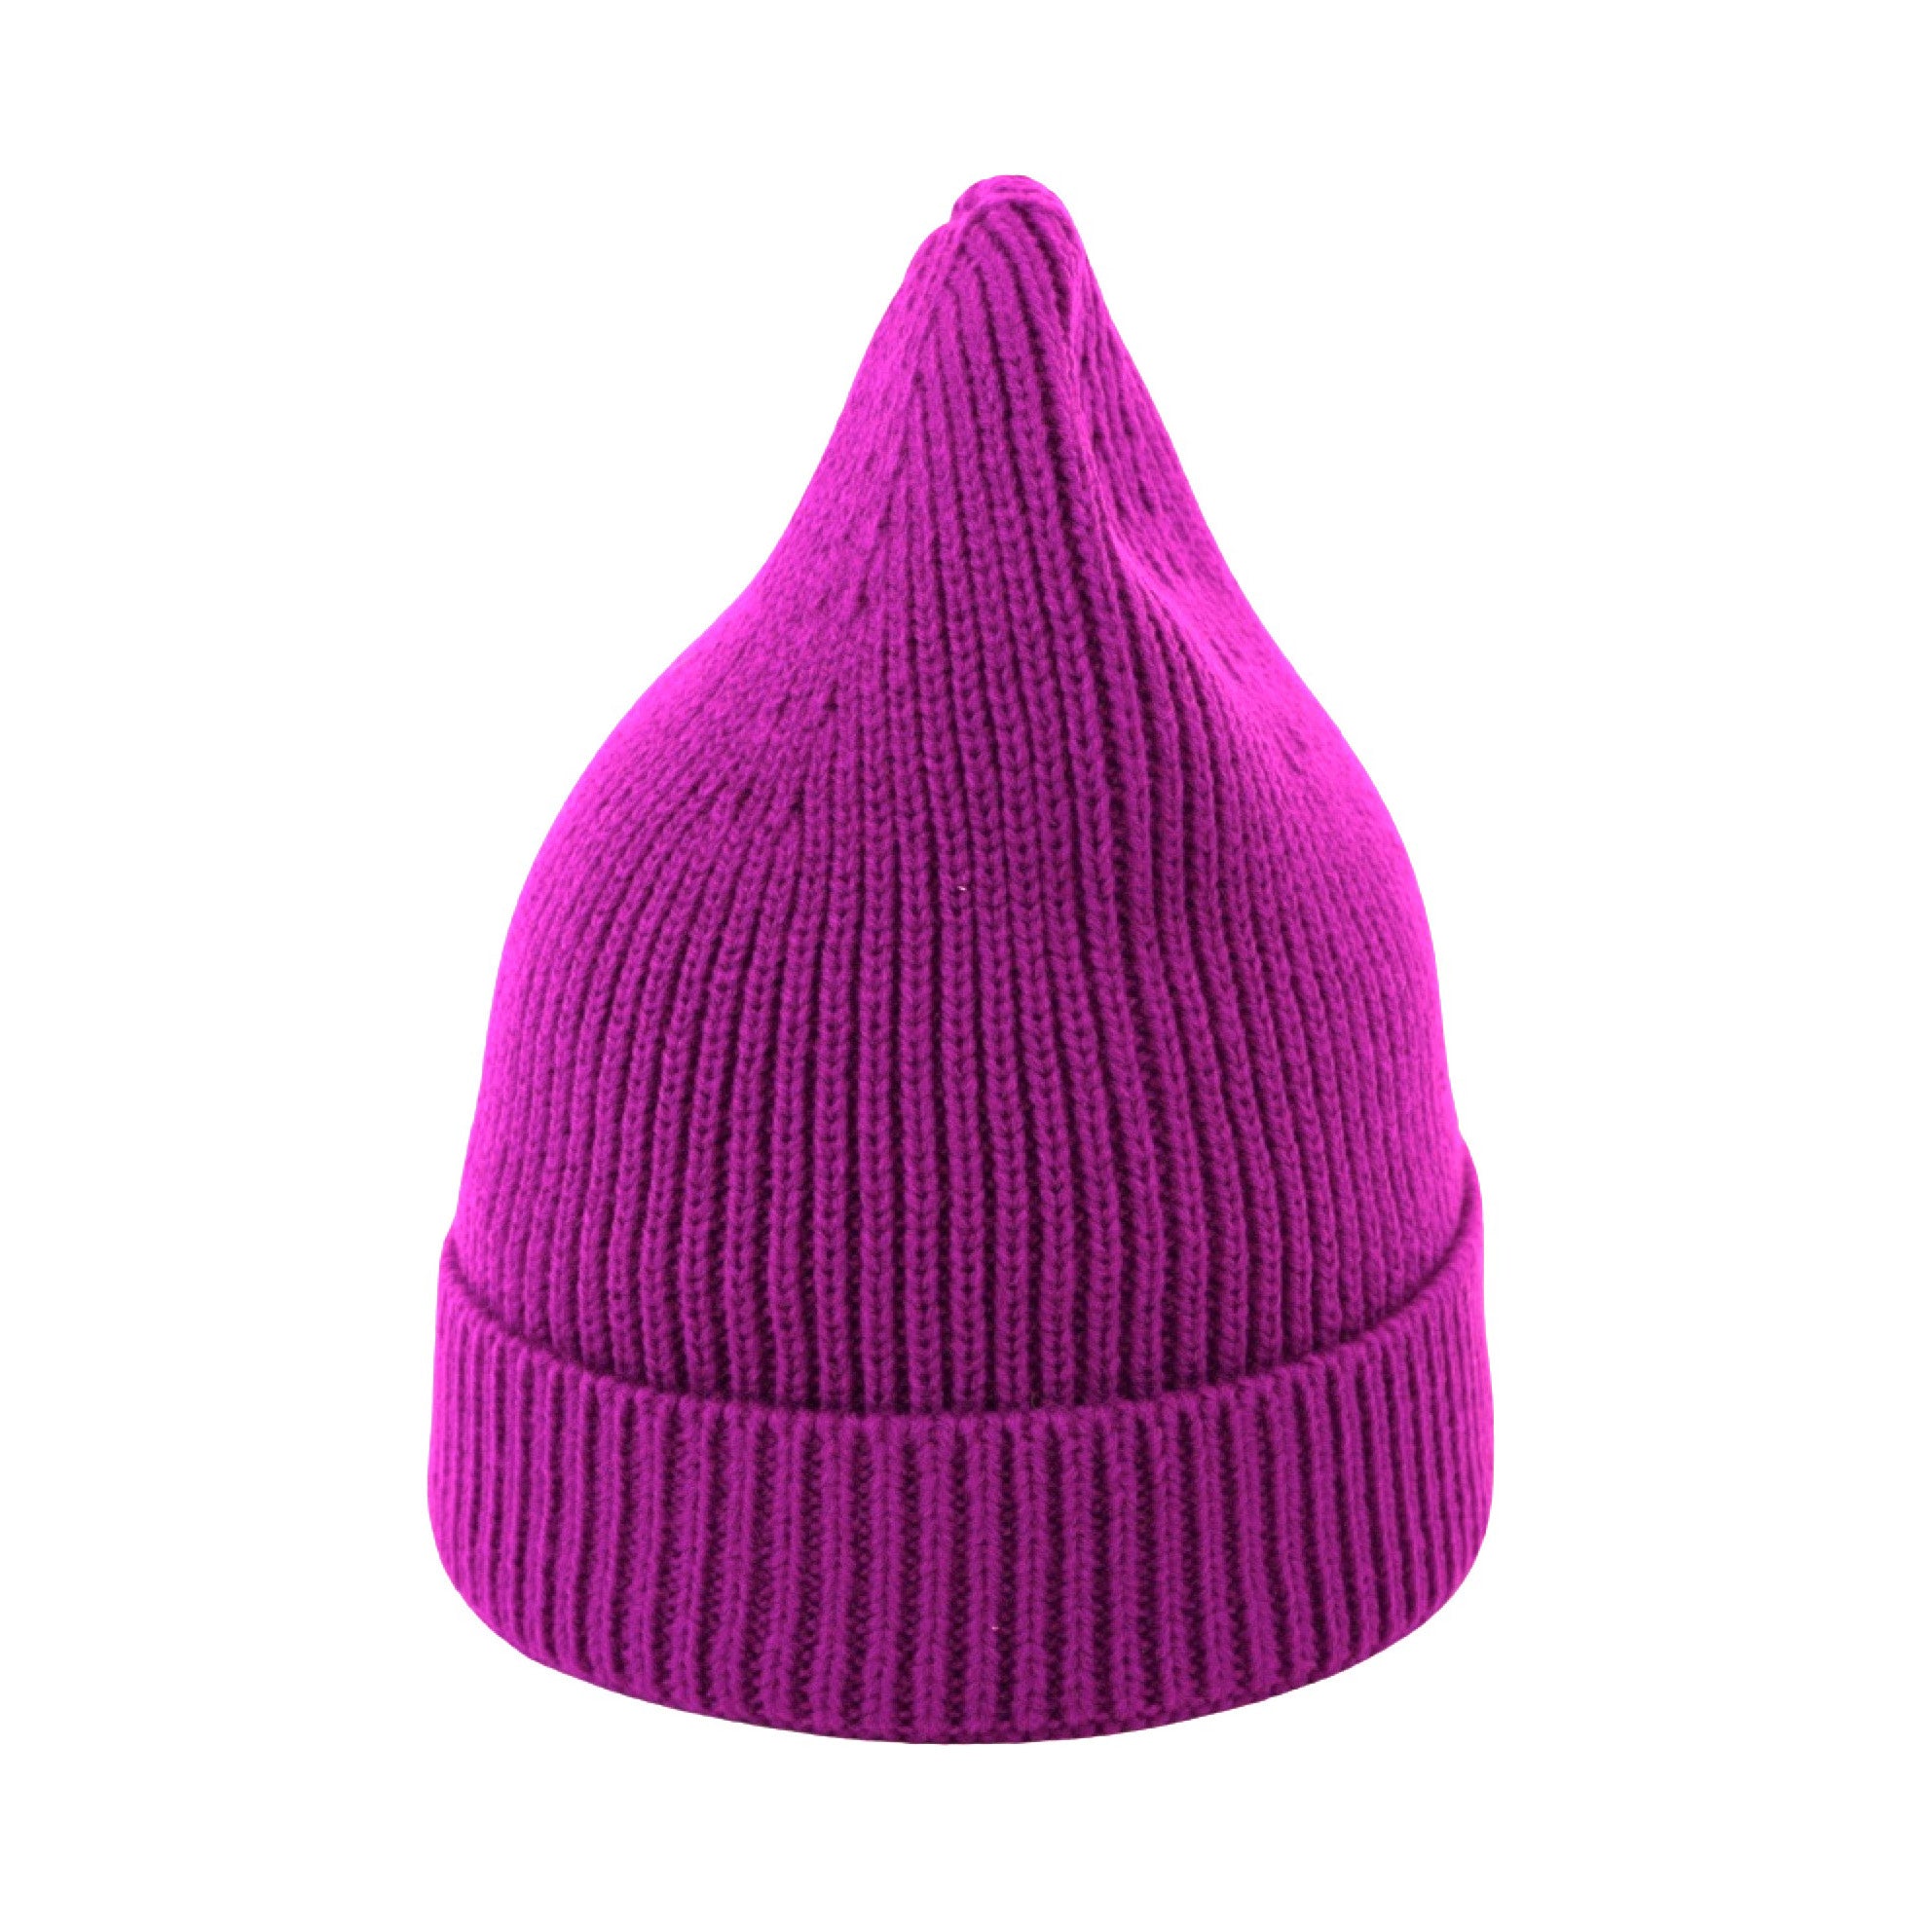 COLR by uLace Beanie - Plum